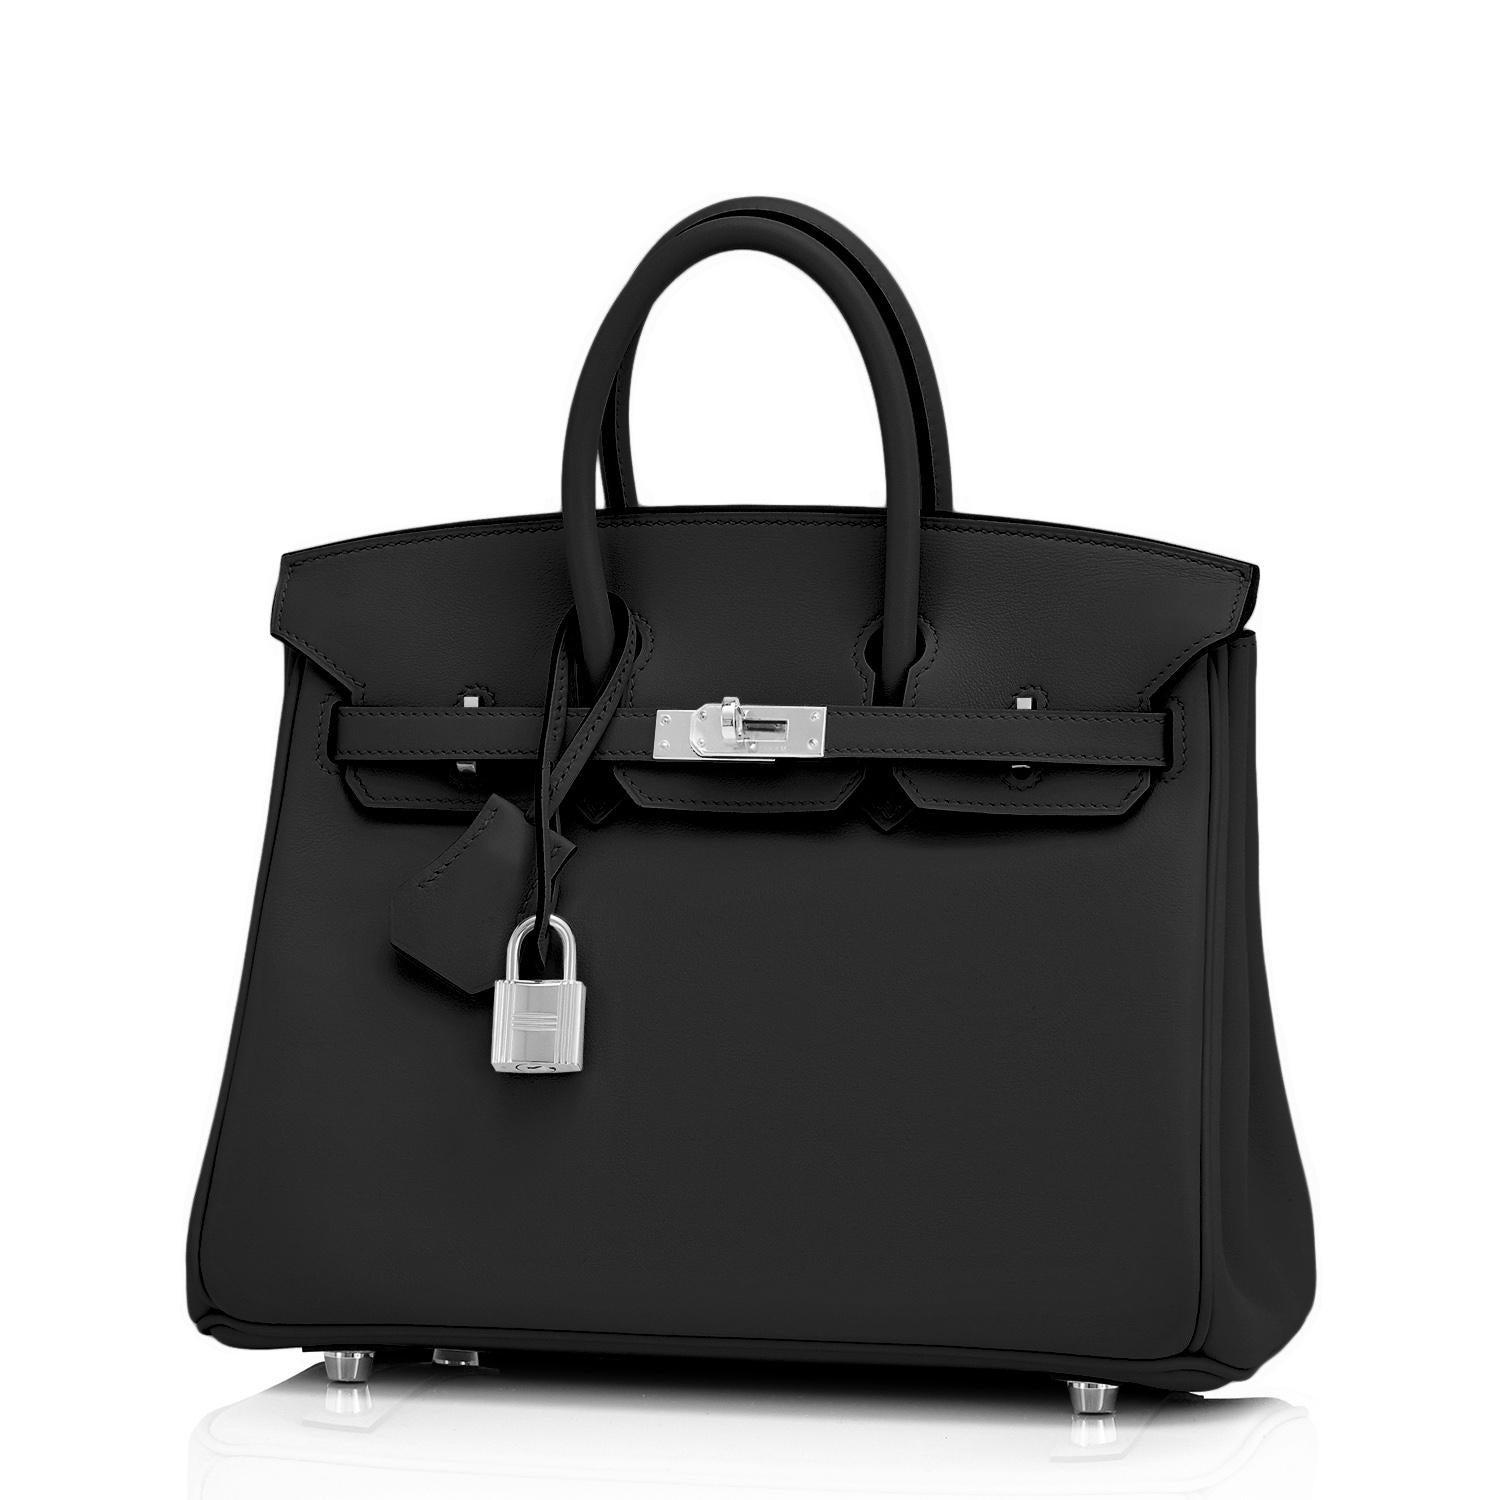 Hermes Birkin 25cm Black Swift Palladium Hardware Y Stamp, 2020
Brand New in Box.  Store Fresh. Pristine Condition (with plastic on hardware)
Just purchased from Hermes store; bag bears new interior 2020 Y stamp.
Perfect gift! Comes full set with